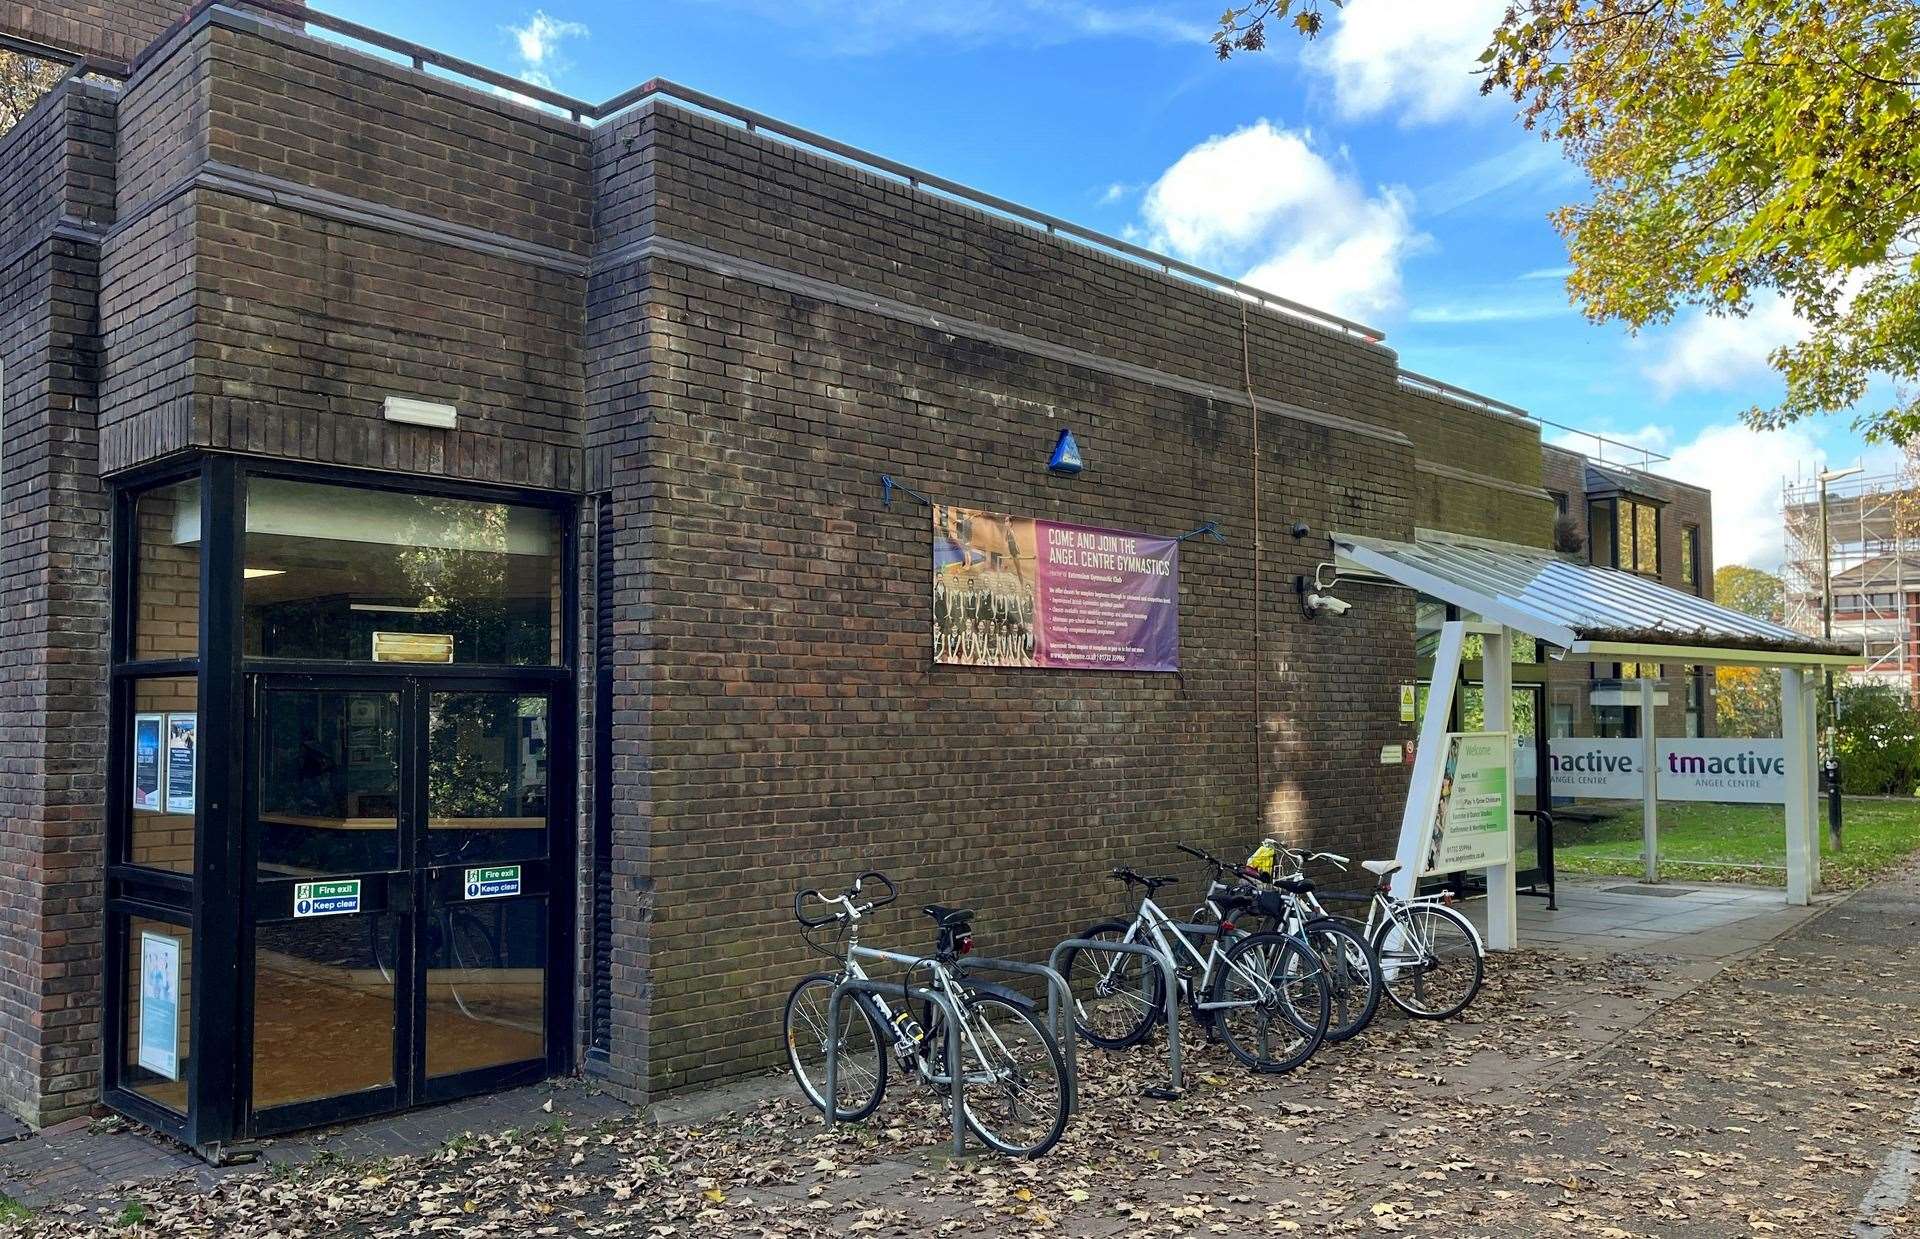 Tonbridge and Malling council is looking to demolish and relocate The Angel Centre